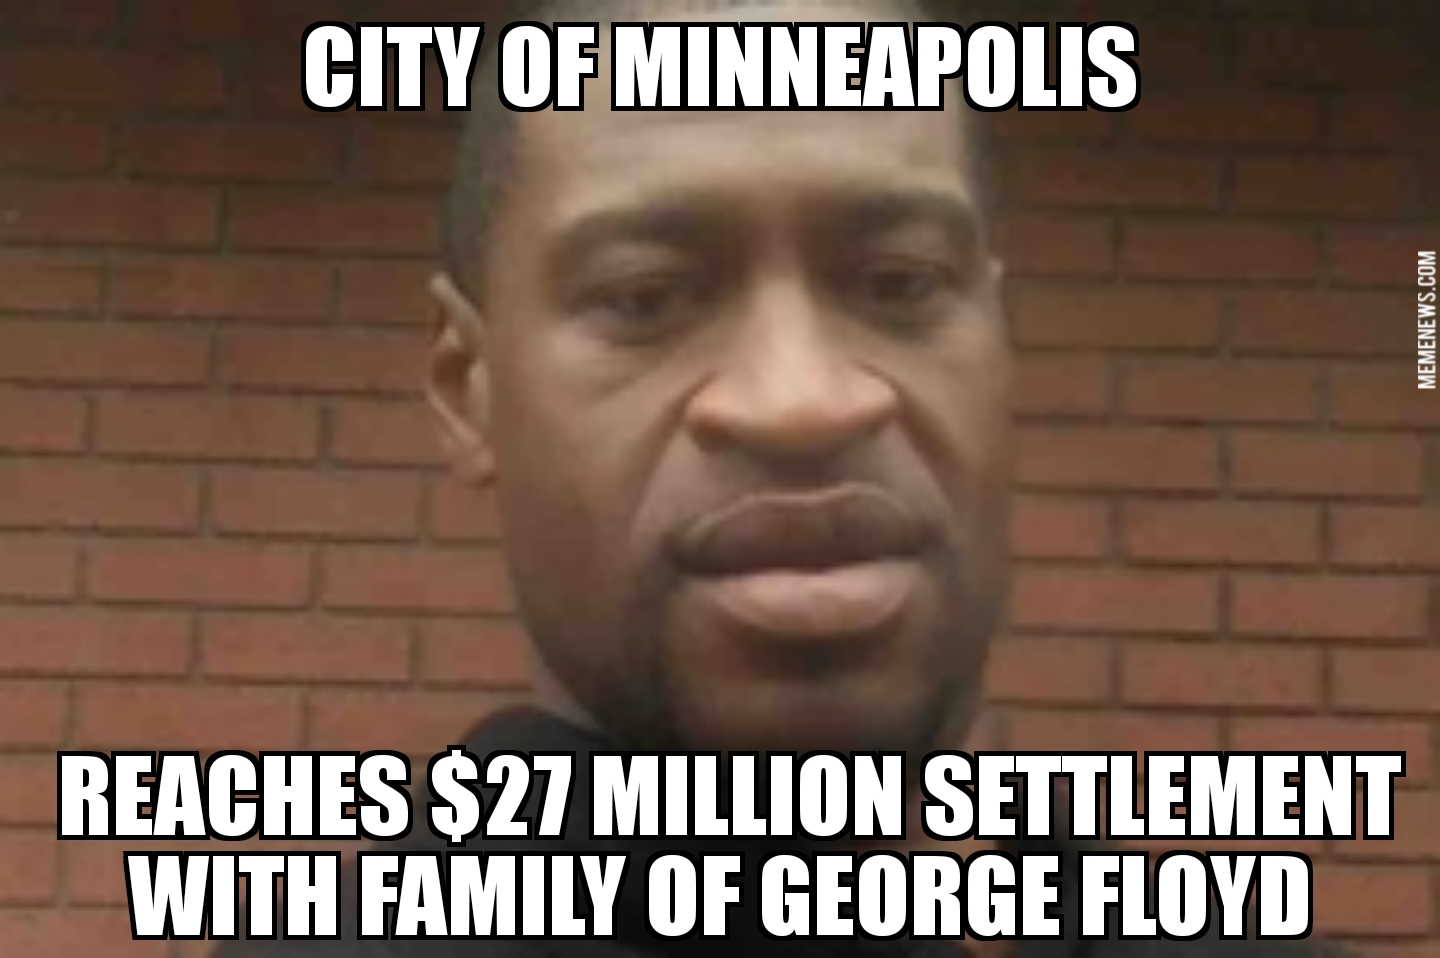 Minneapolis reaches settlement with George Floyd’s family